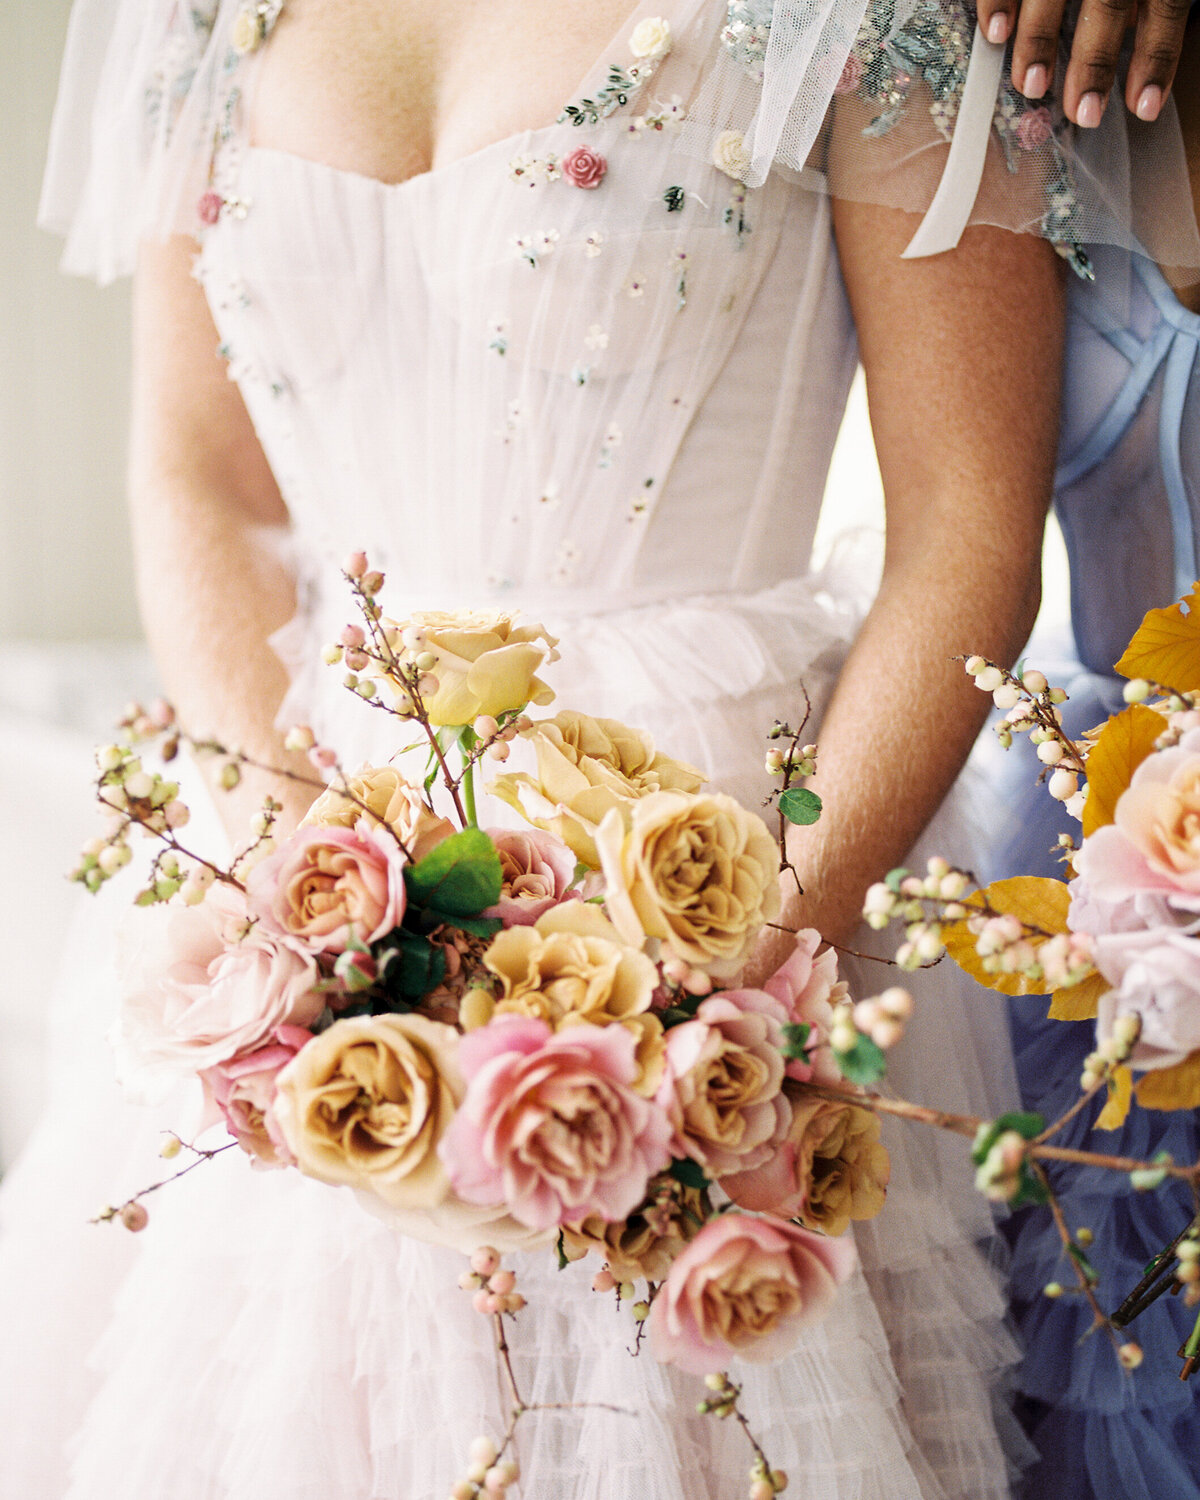 A close up of a bouquet with romantic florals with blush and yellow roses